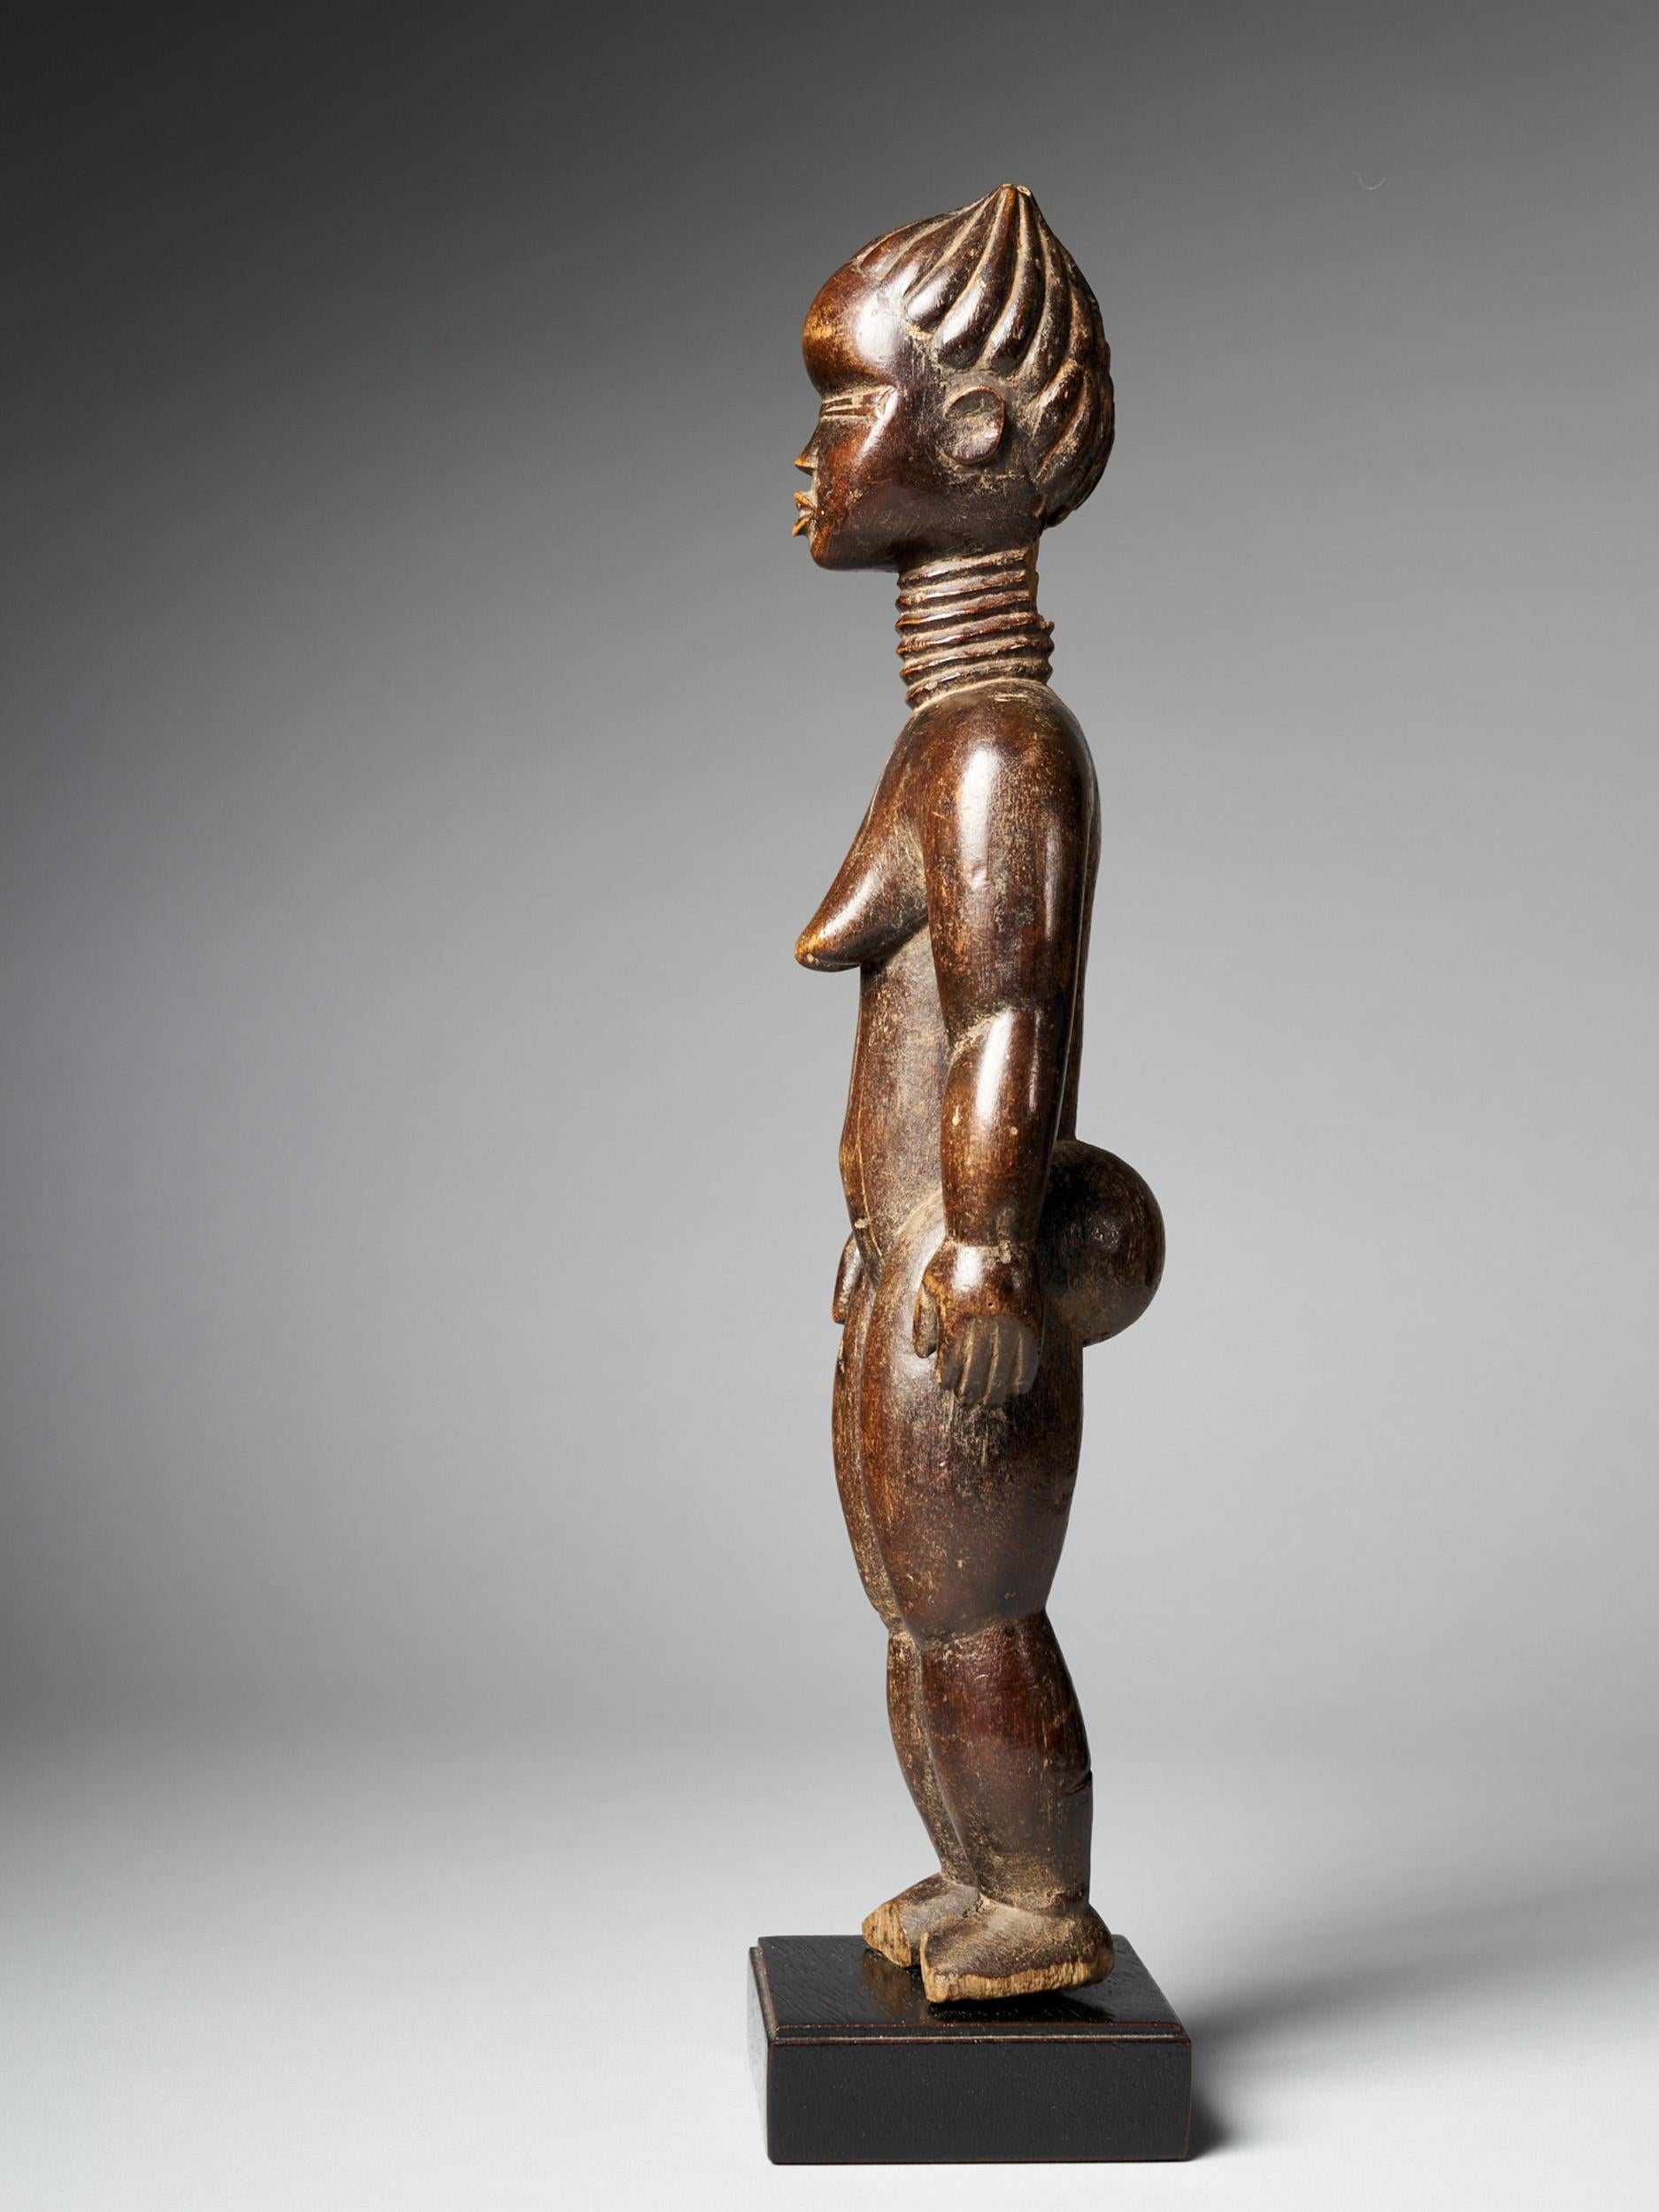 In Dan society, sculptures of women are prestigious objects that reflect positively both on their owners' and their subjects' reputations. Among the most costly of Dan expressive forms, they are commissioned by men to honour an exceptionally